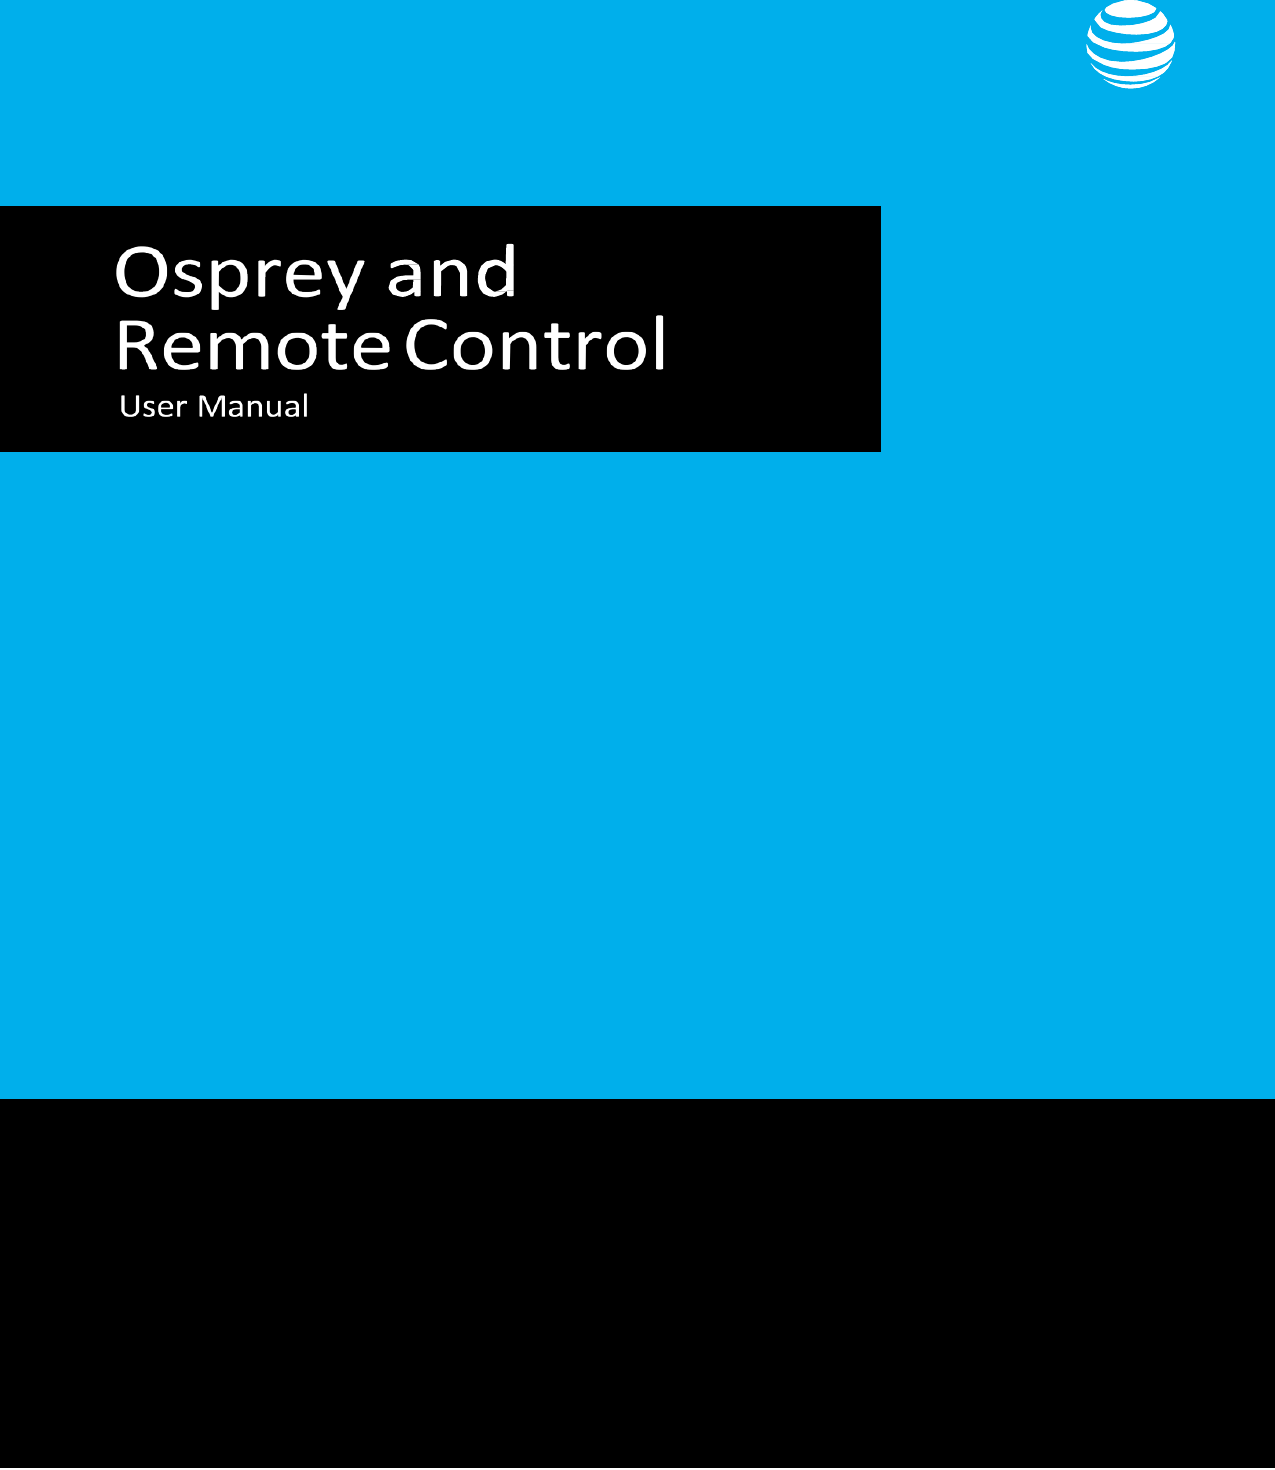     User Manual—Osprey and Remote Control User Manual—Osprey and Remote Control              Version 1.0   08/2017  